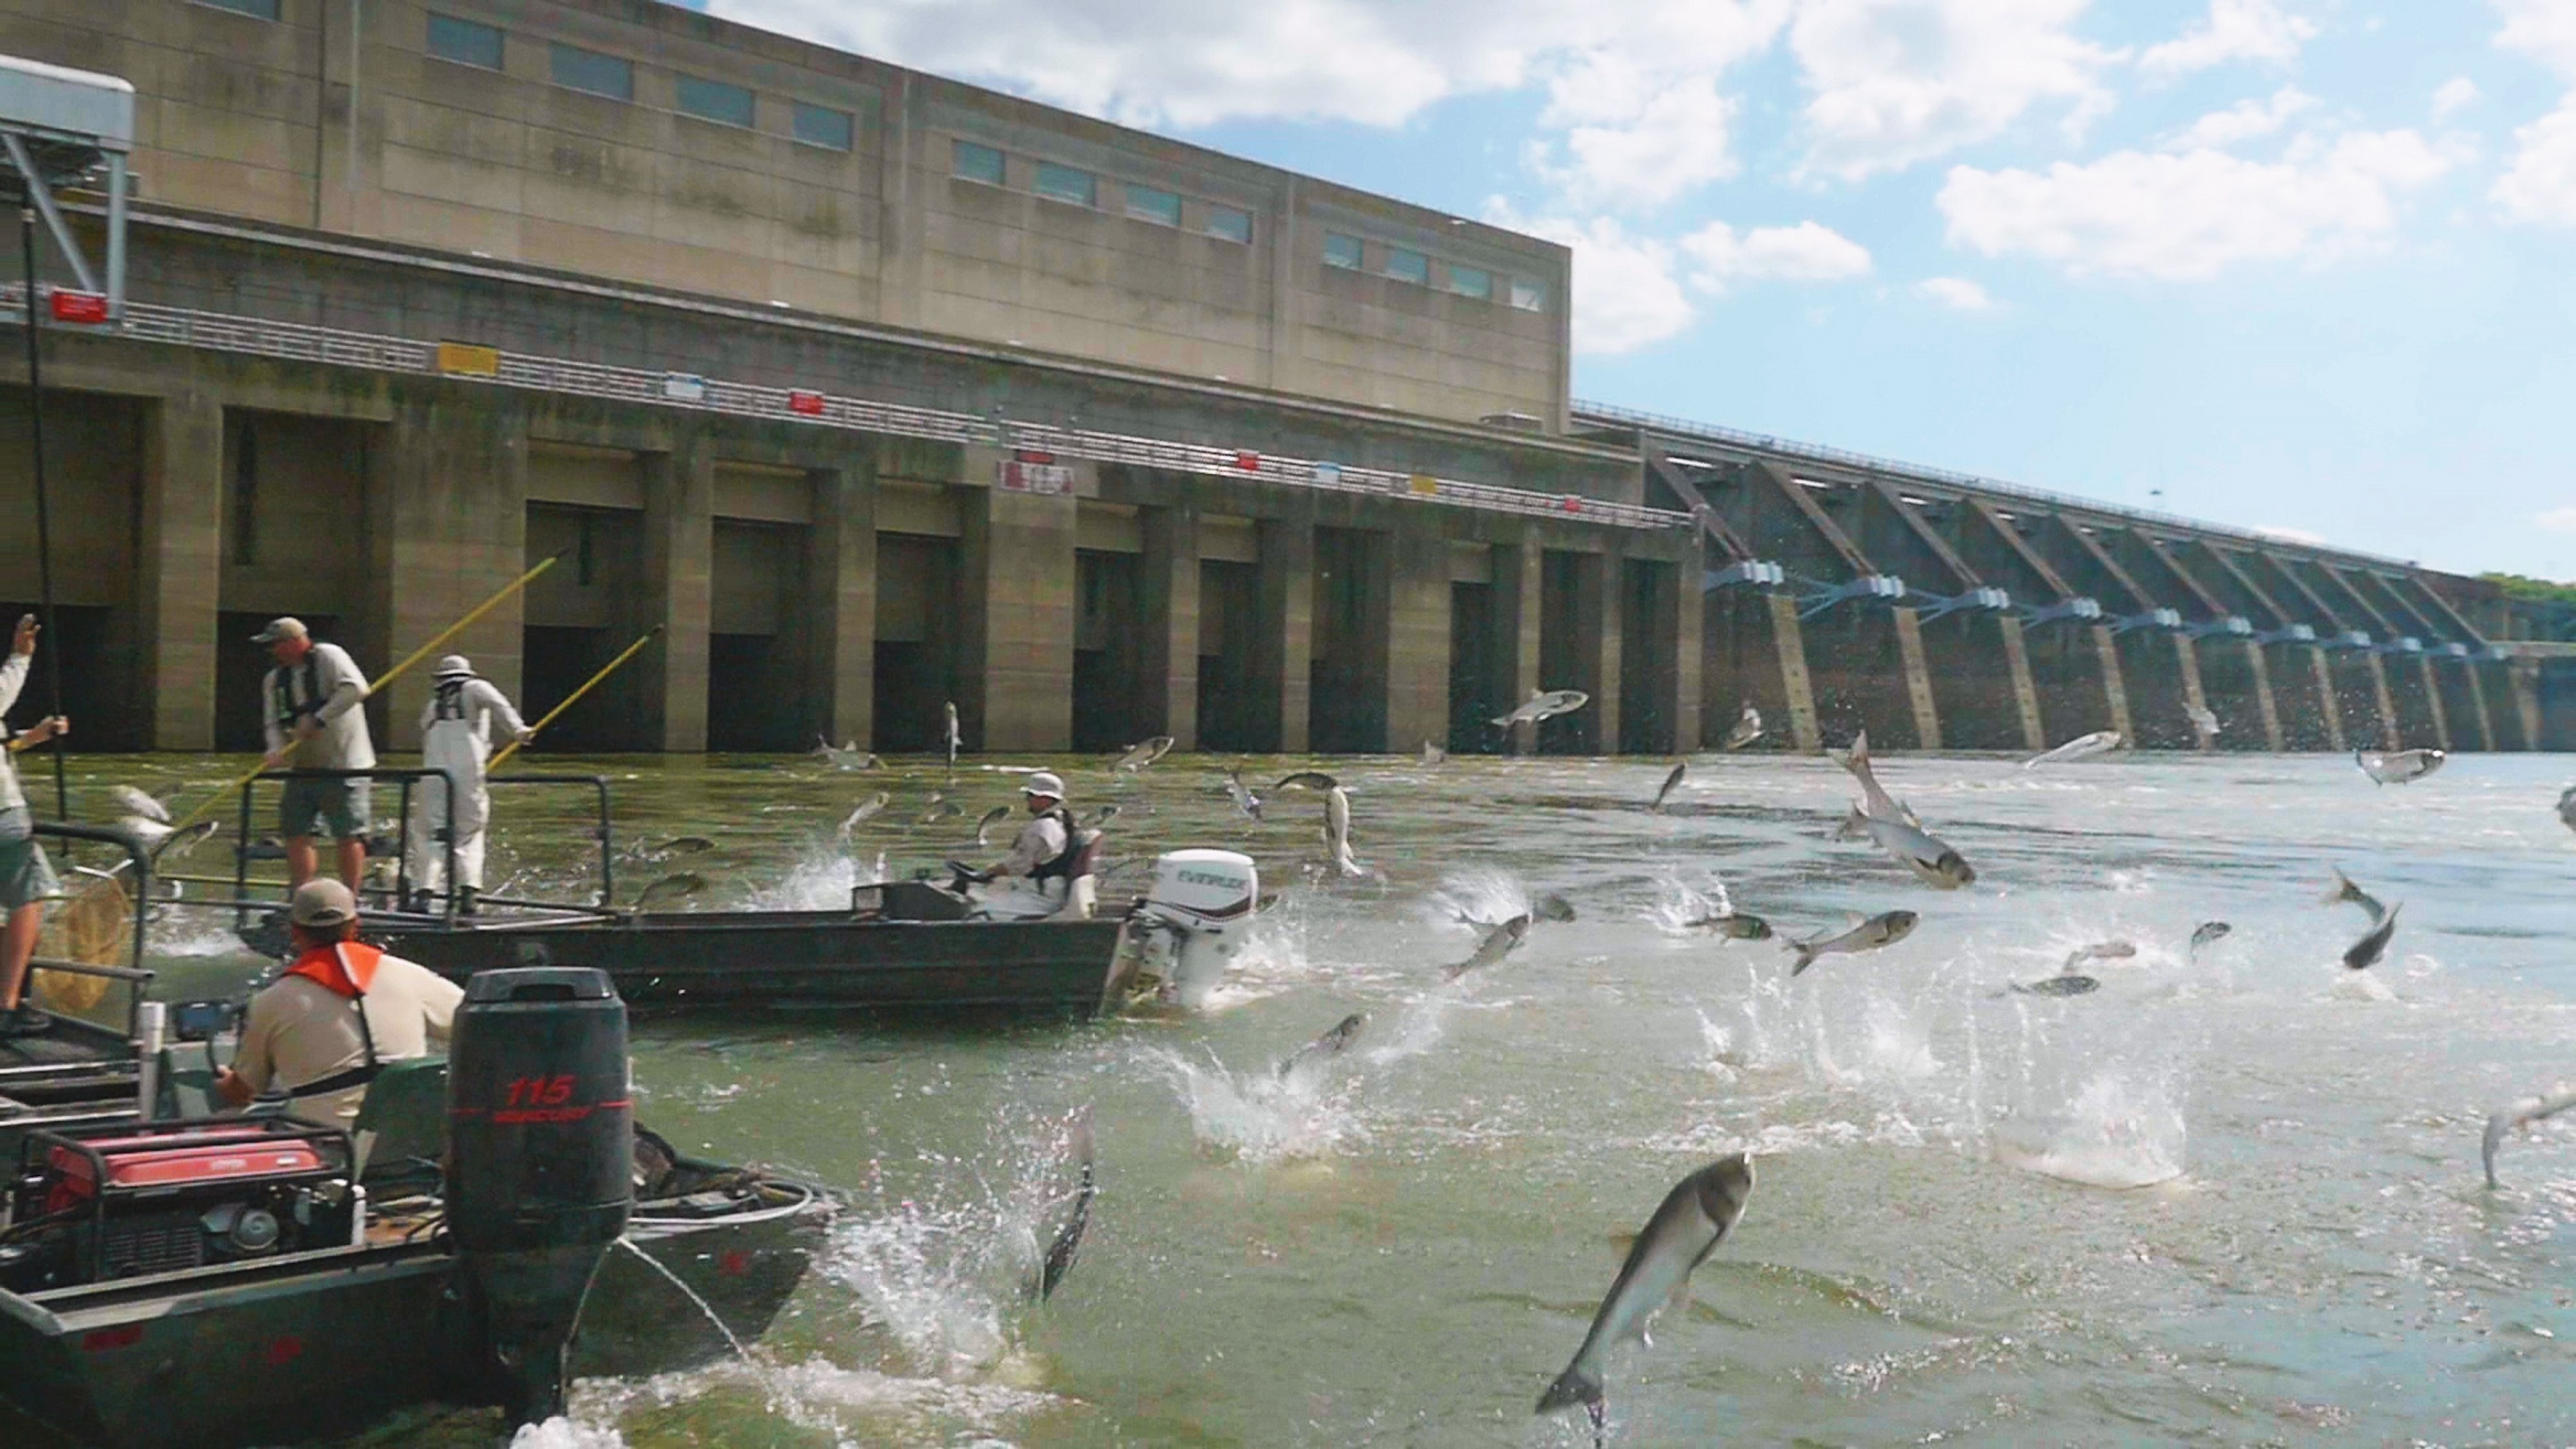 Biologists from Tennessee Wildlife Resources Agency and Kentucky Department of Fish & Wildlife use electrofishing boats to catch Silver Carp in the Lake Barkley Dam tailwaters.